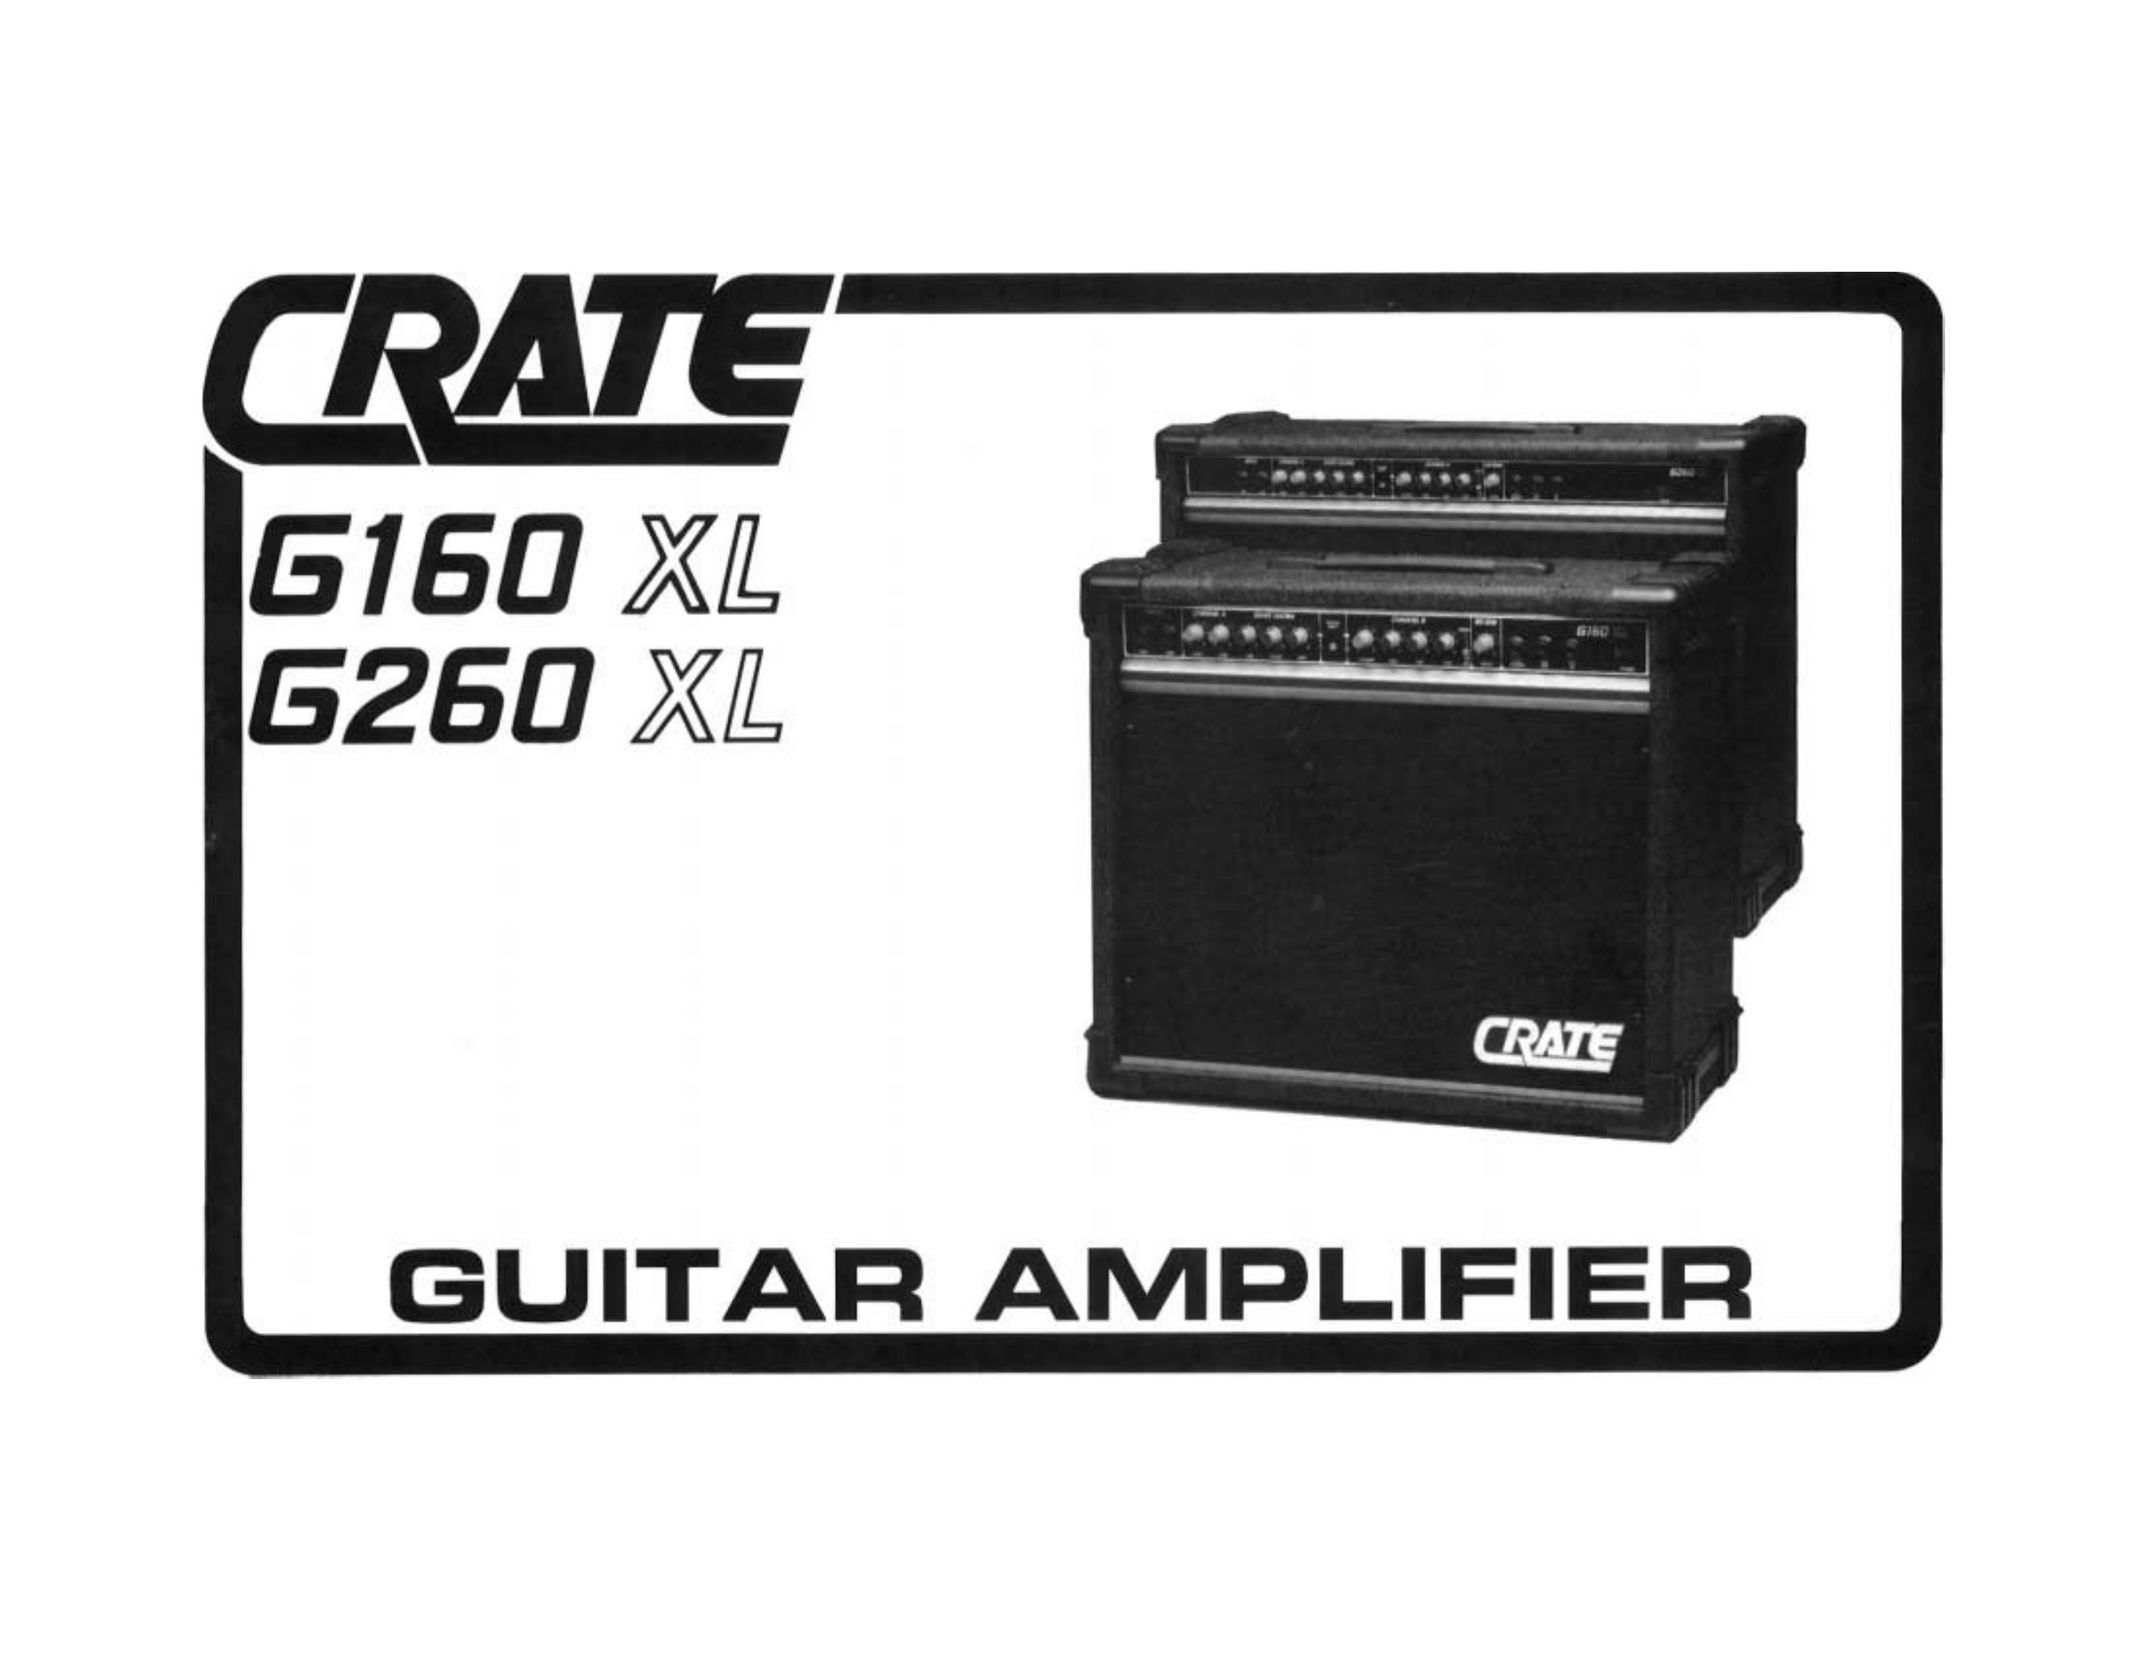 Crate Amplifiers G260 XL Stereo Amplifier User Manual